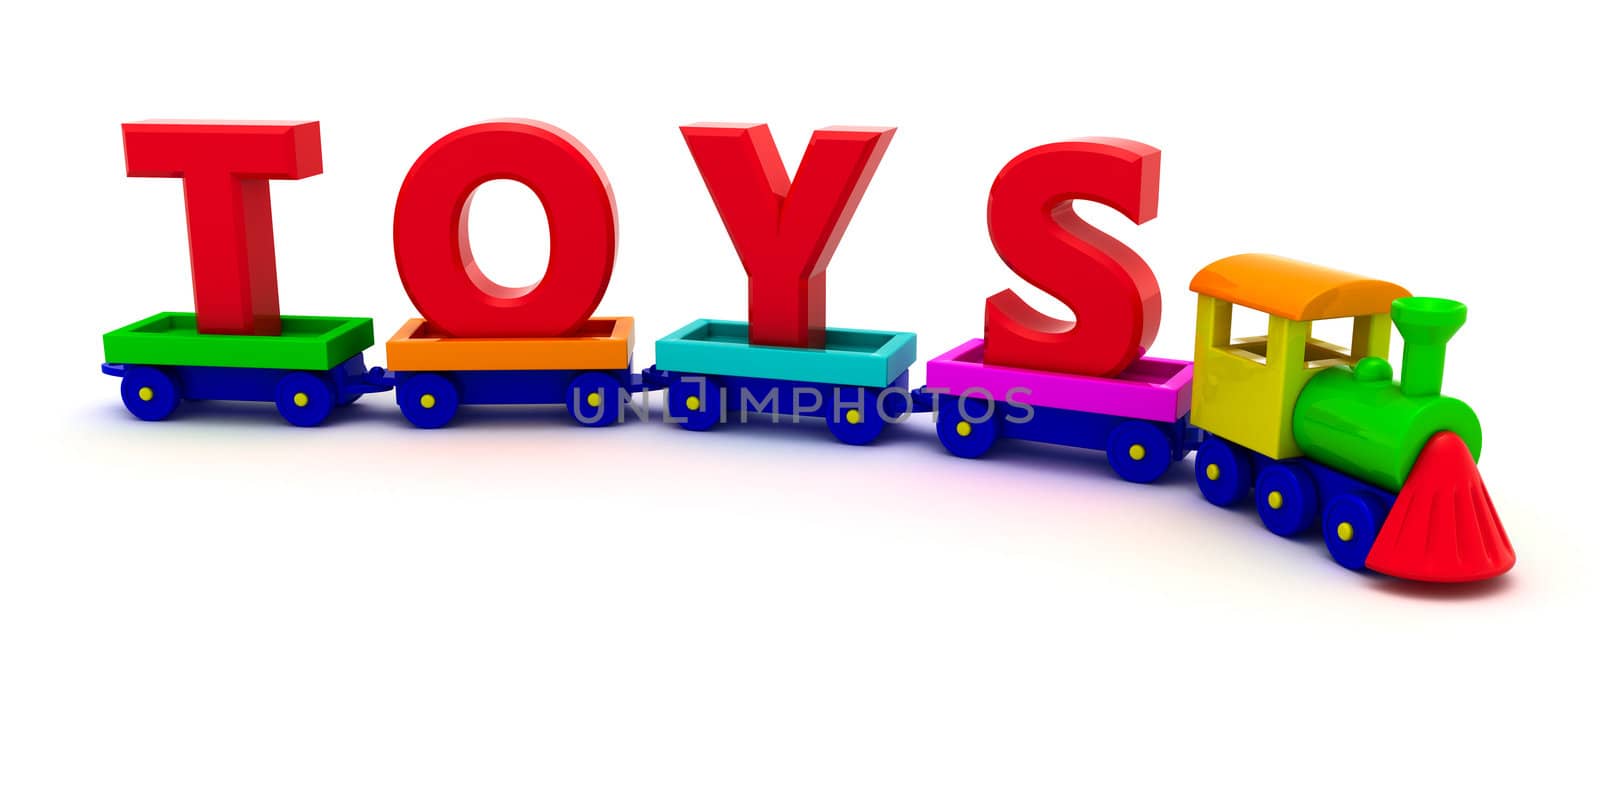 Red letters Toys on the toy train